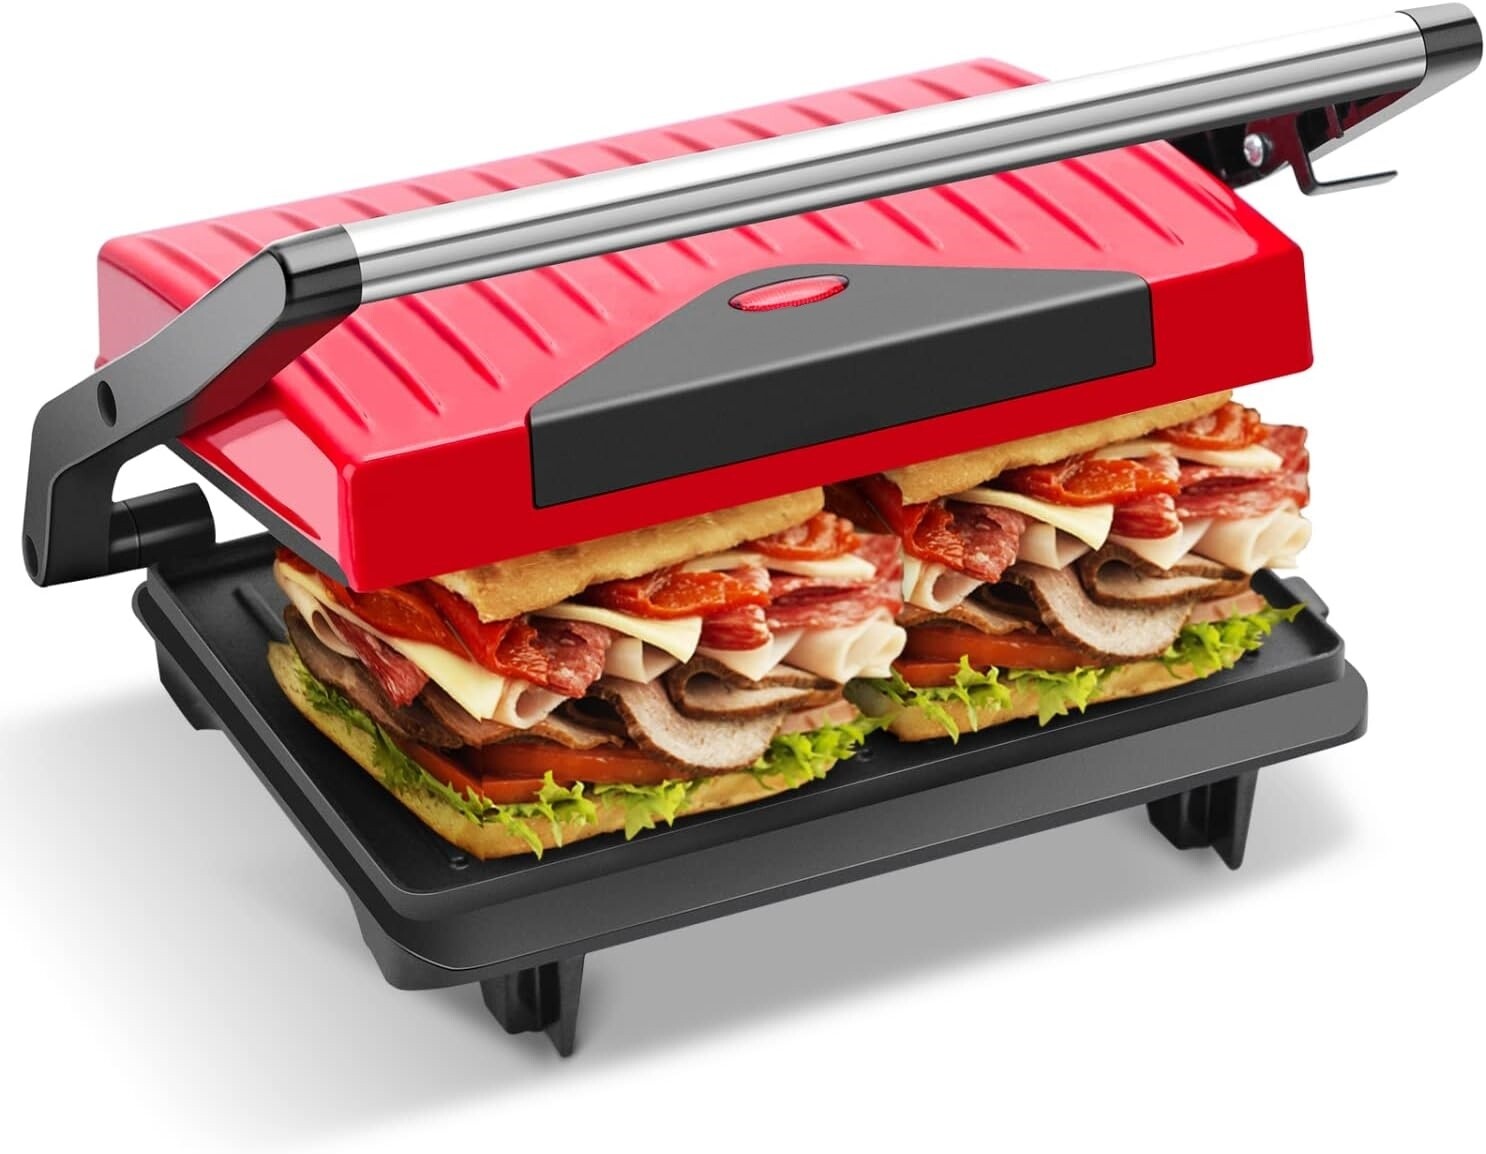 750-2000watts Sandwich Toaster Maker, Flat Open Large Grill, Adjustable Temperature Control, Drip Tray, Stainless Steel